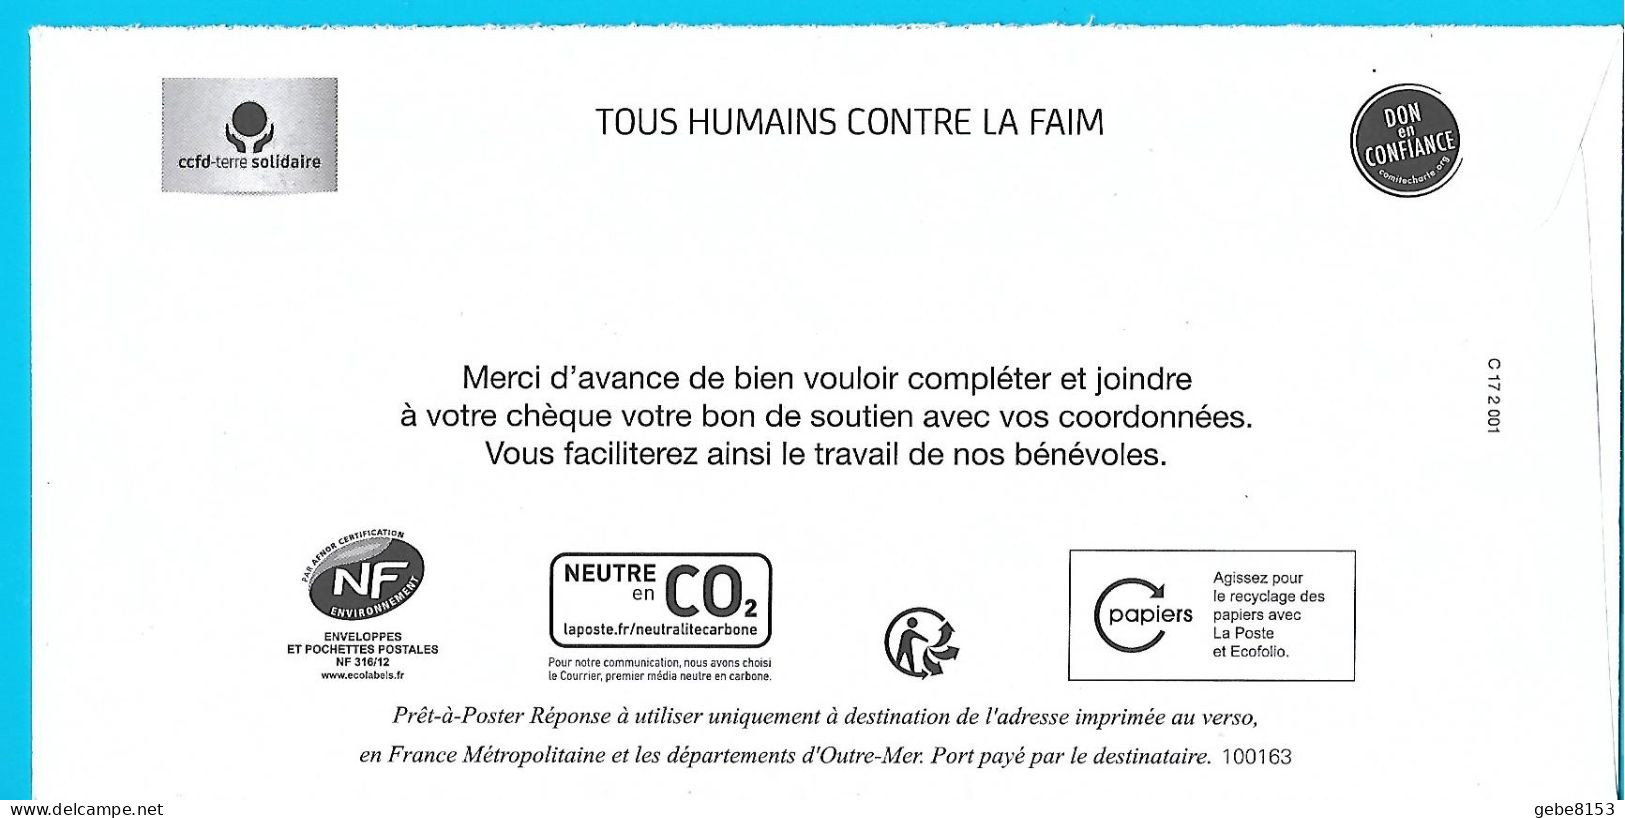 PostRéponse Lettre Prioritaire Marianne Ciappa CCFD Terre Solidaire Toshiba - Prêts-à-poster:Answer/Ciappa-Kavena